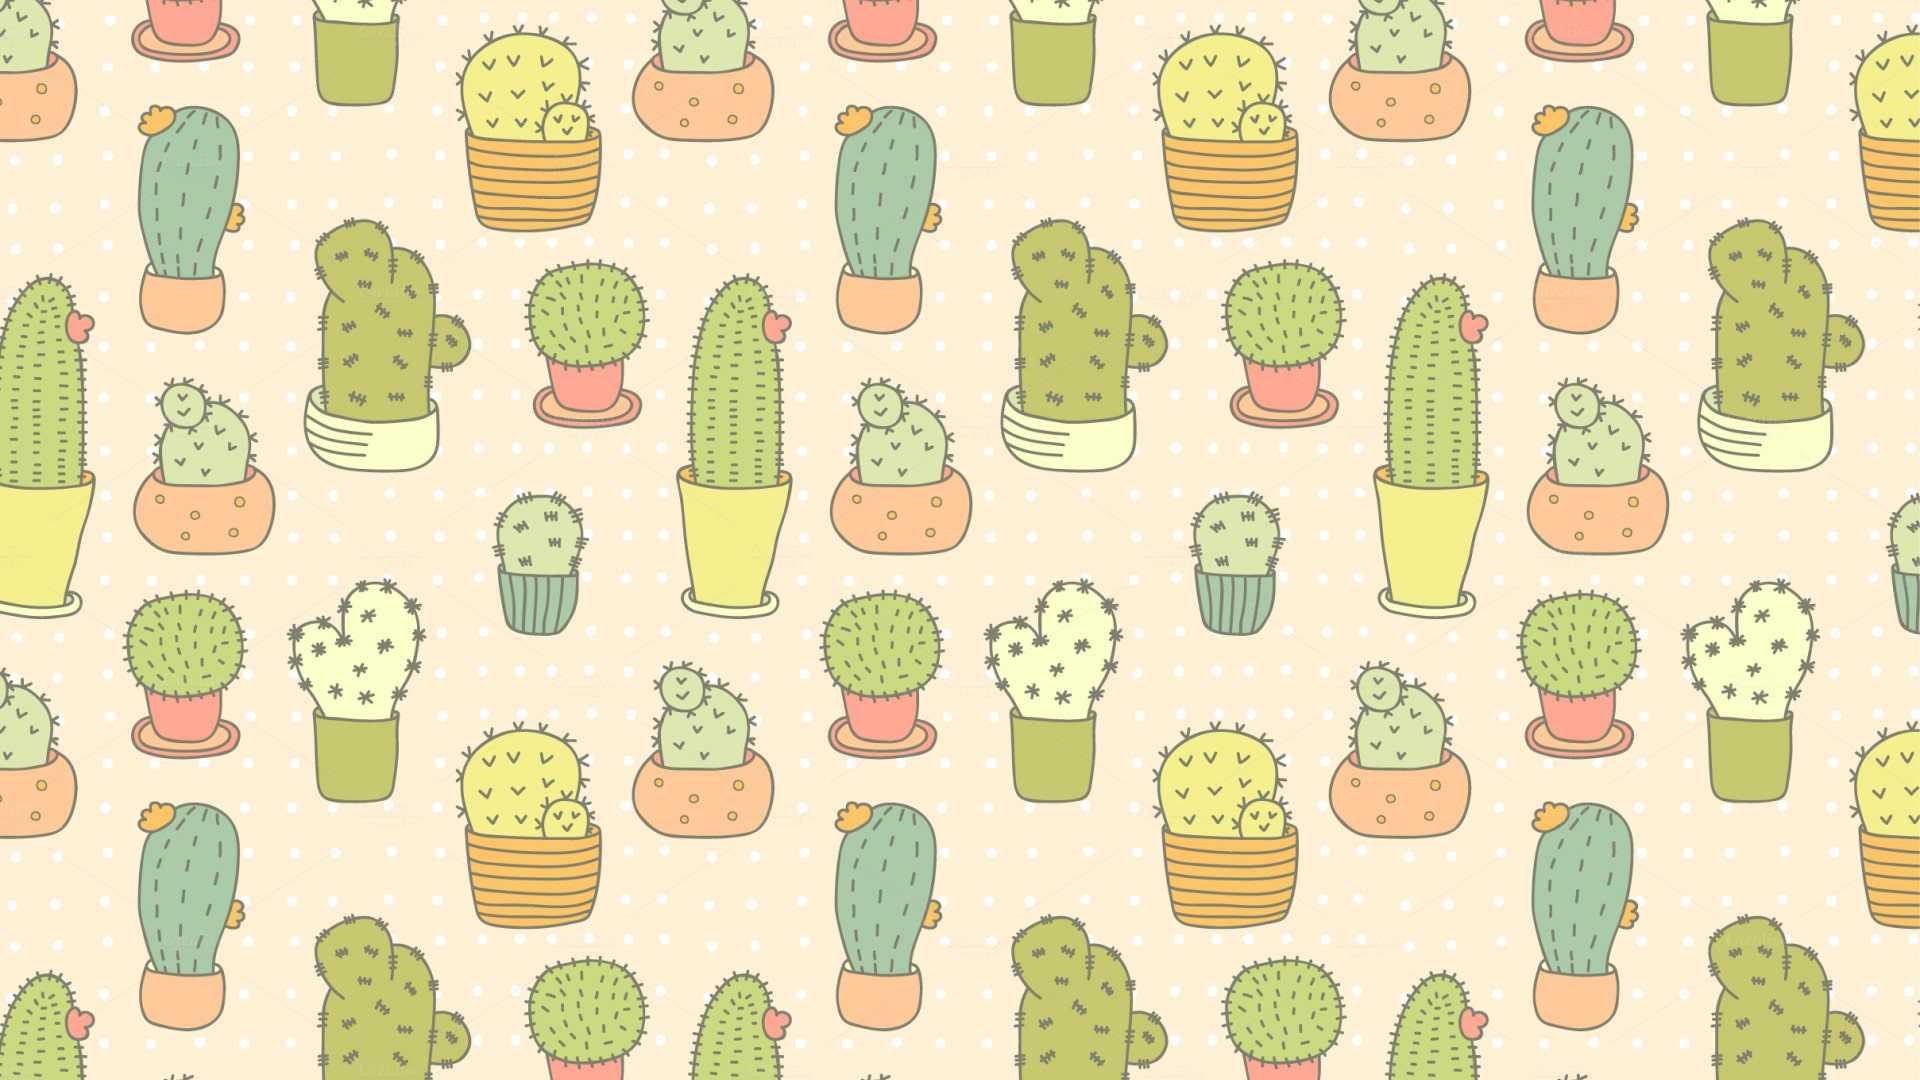 A pattern of cacti in pots - Cactus